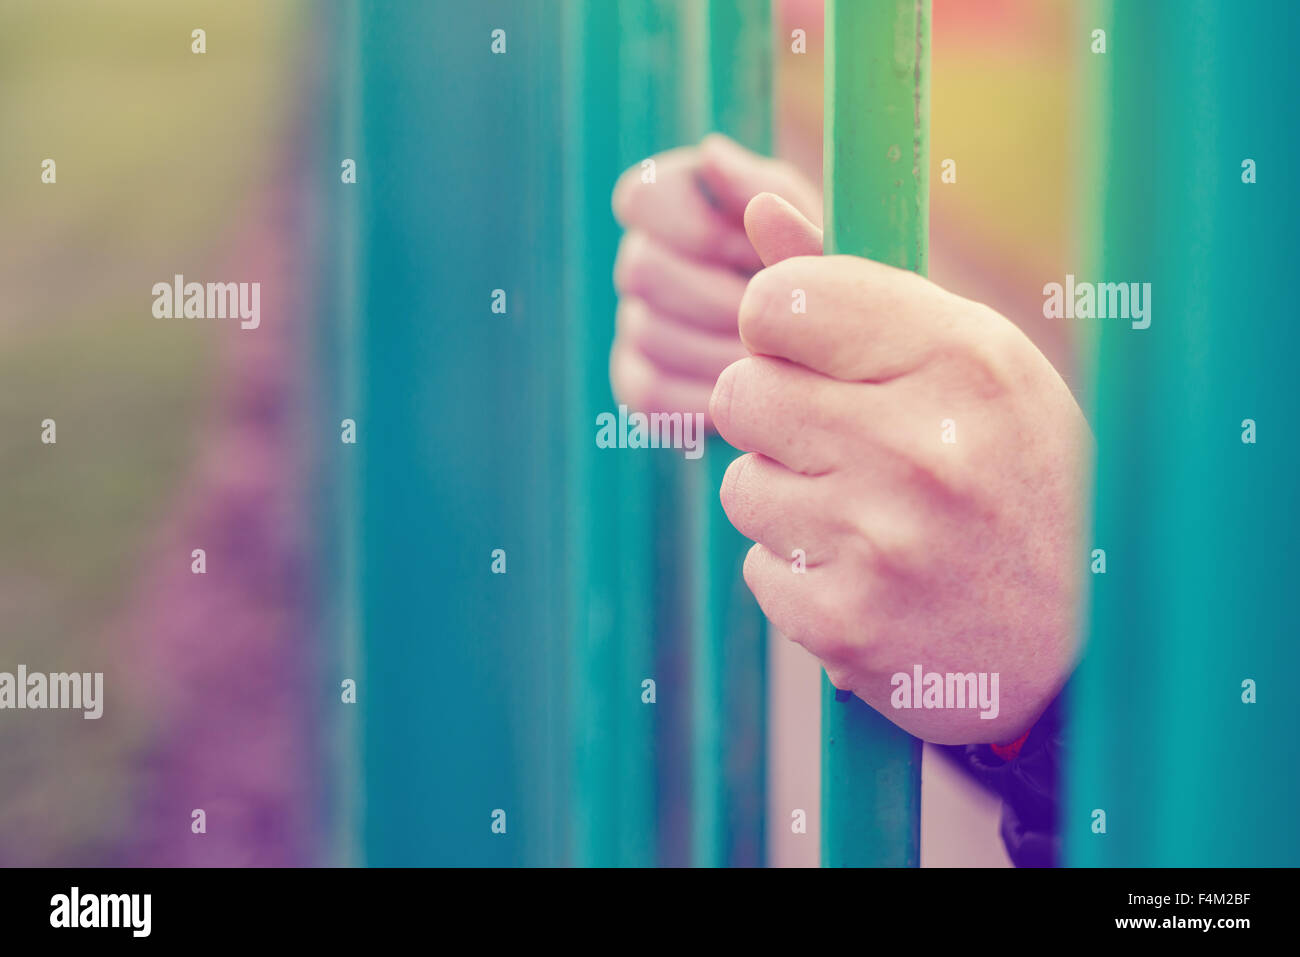 Person behind bars, female hands gripping steel bars, concept of captivity and imprisonment, retro toned, selective focus Stock Photo